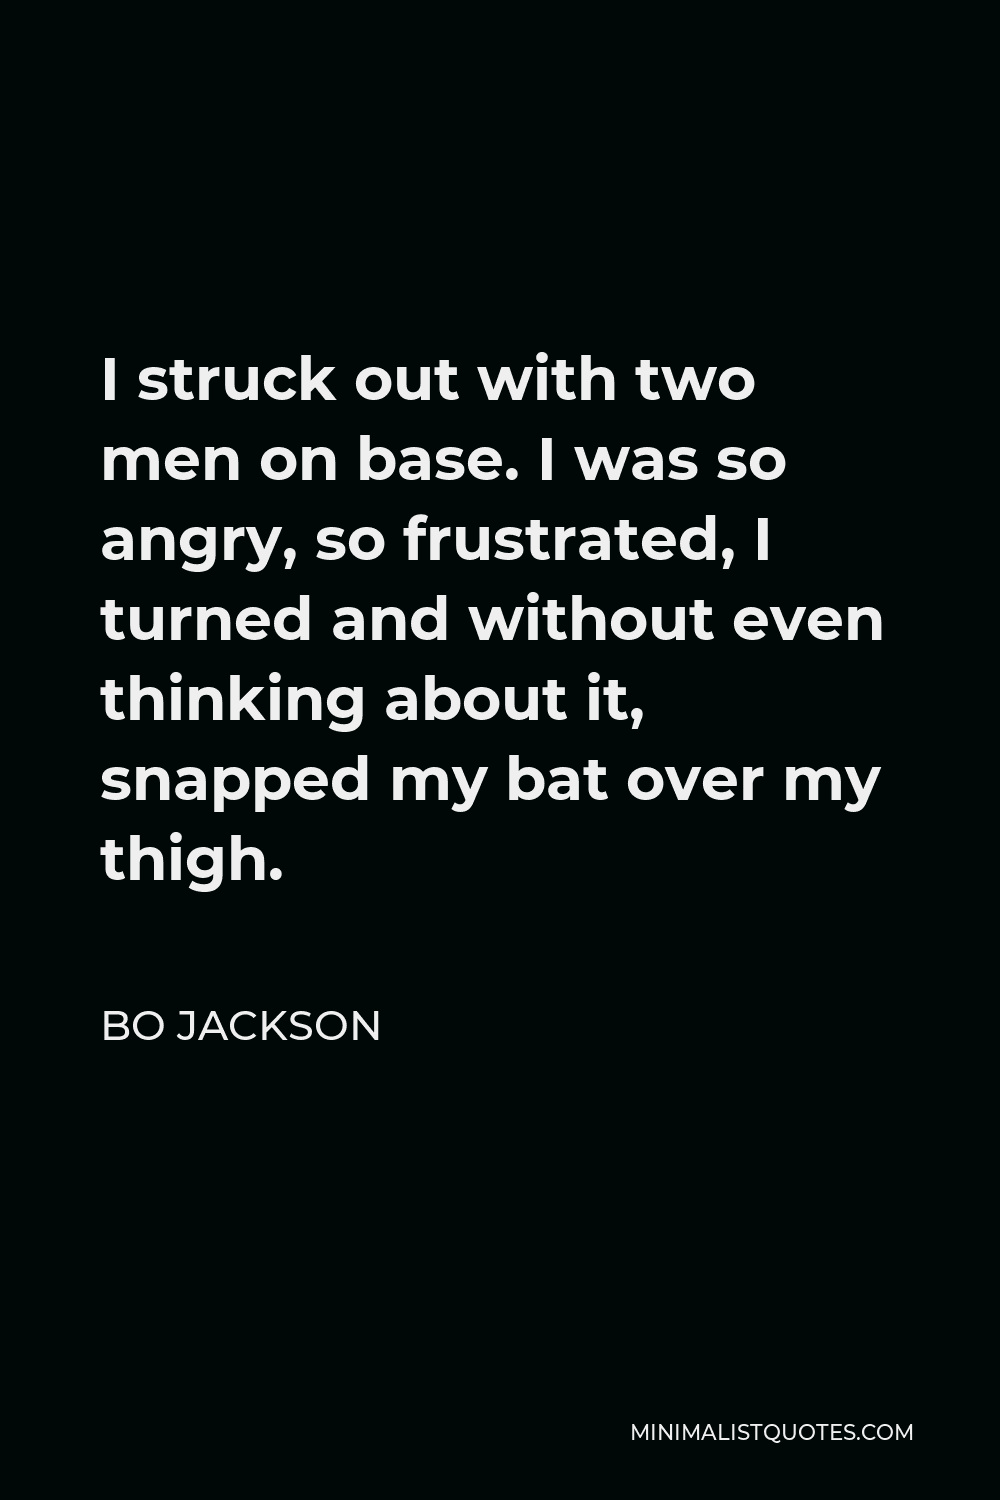 Bo Jackson Quote - I struck out with two men on base. I was so angry, so frustrated, I turned and without even thinking about it, snapped my bat over my thigh.